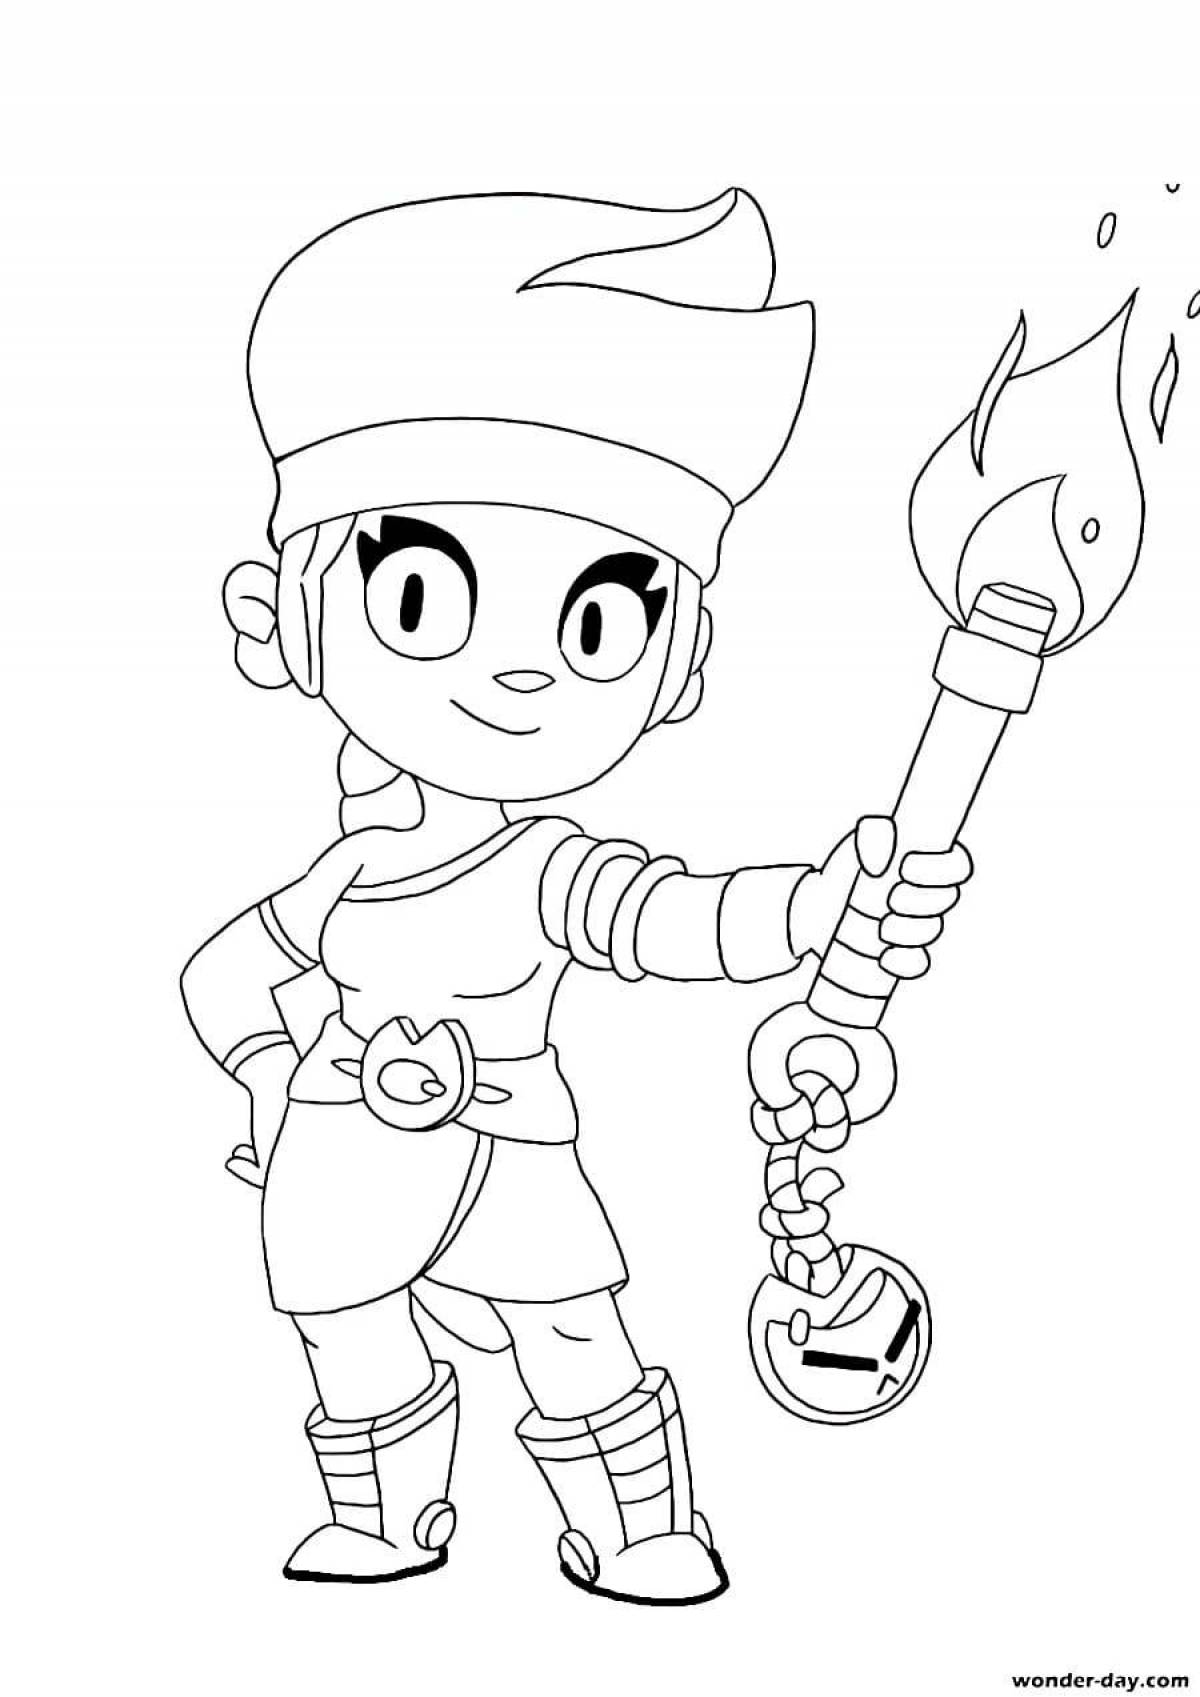 Dazzling Ember Coloring Page